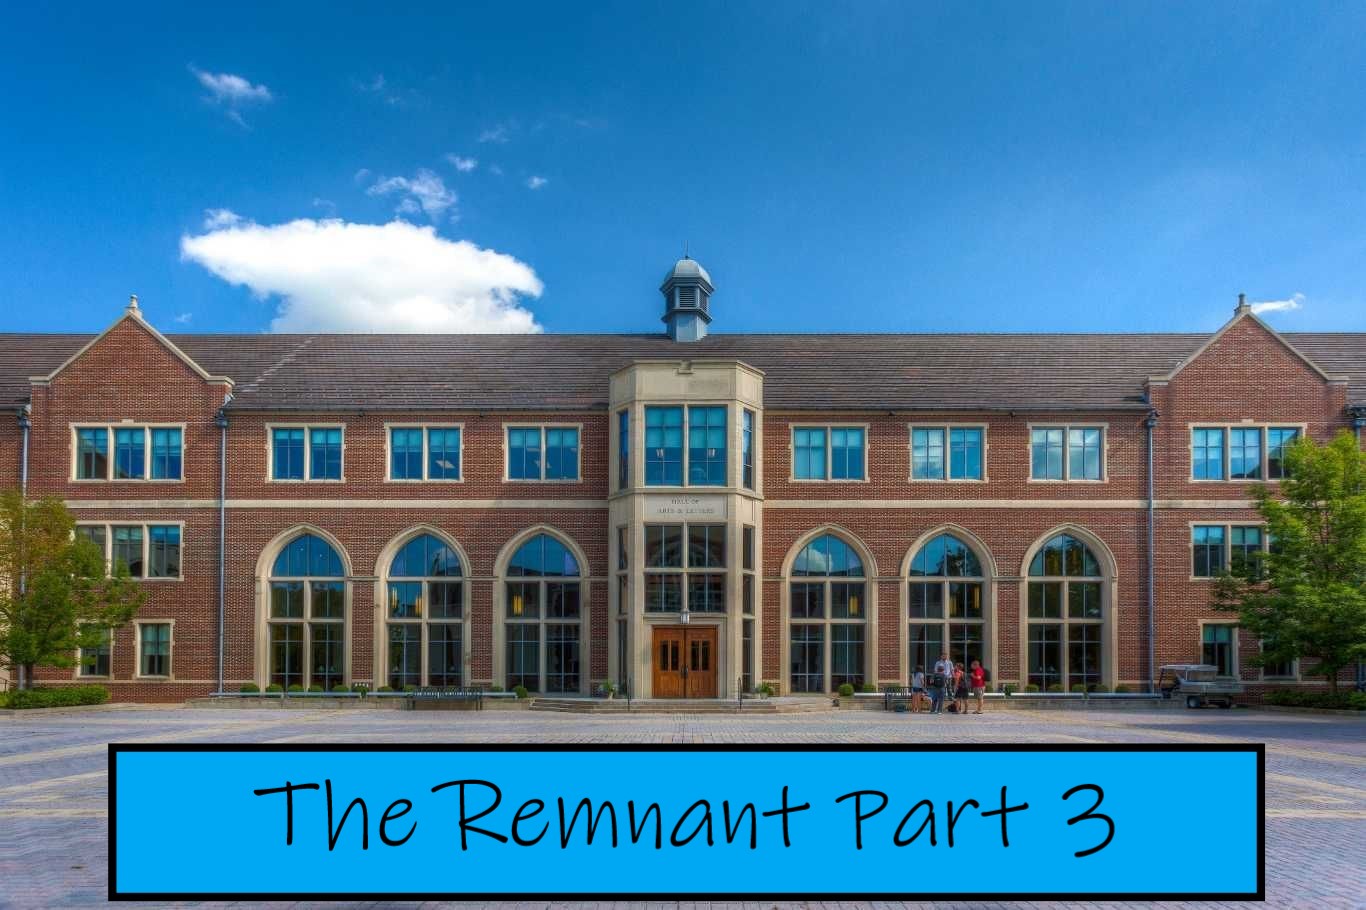 The Remnant Part 3